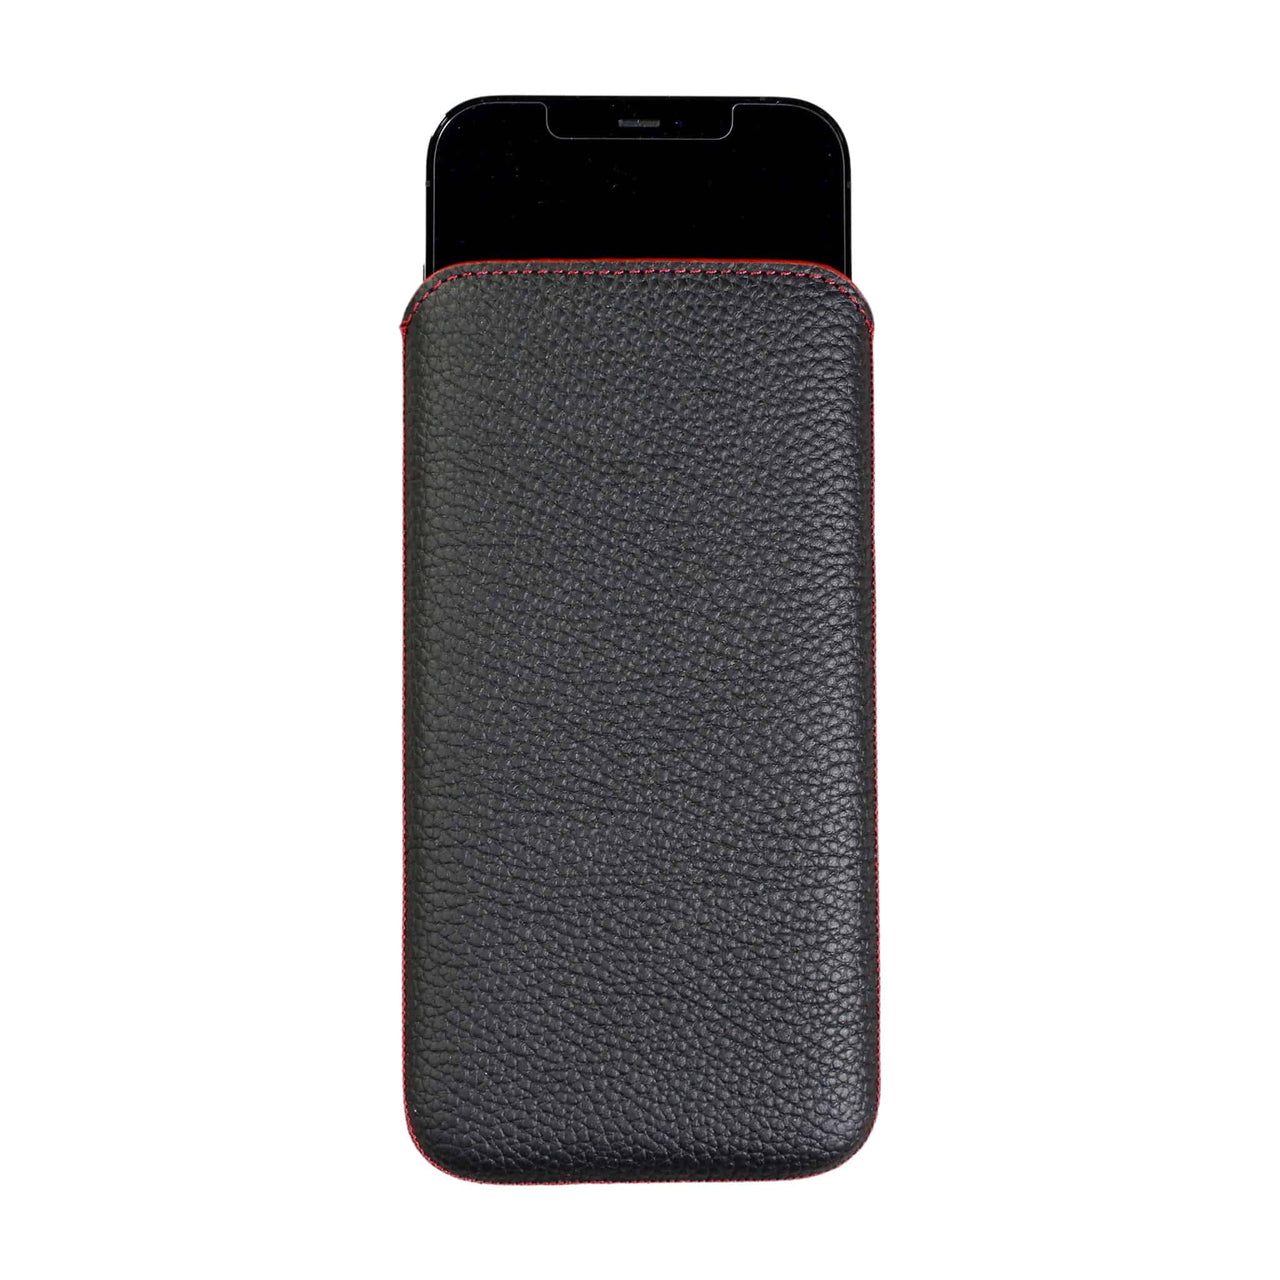 iPhone 12 Pro Max Genuine Leather Pouch Sleeve Case | Artisanpouch